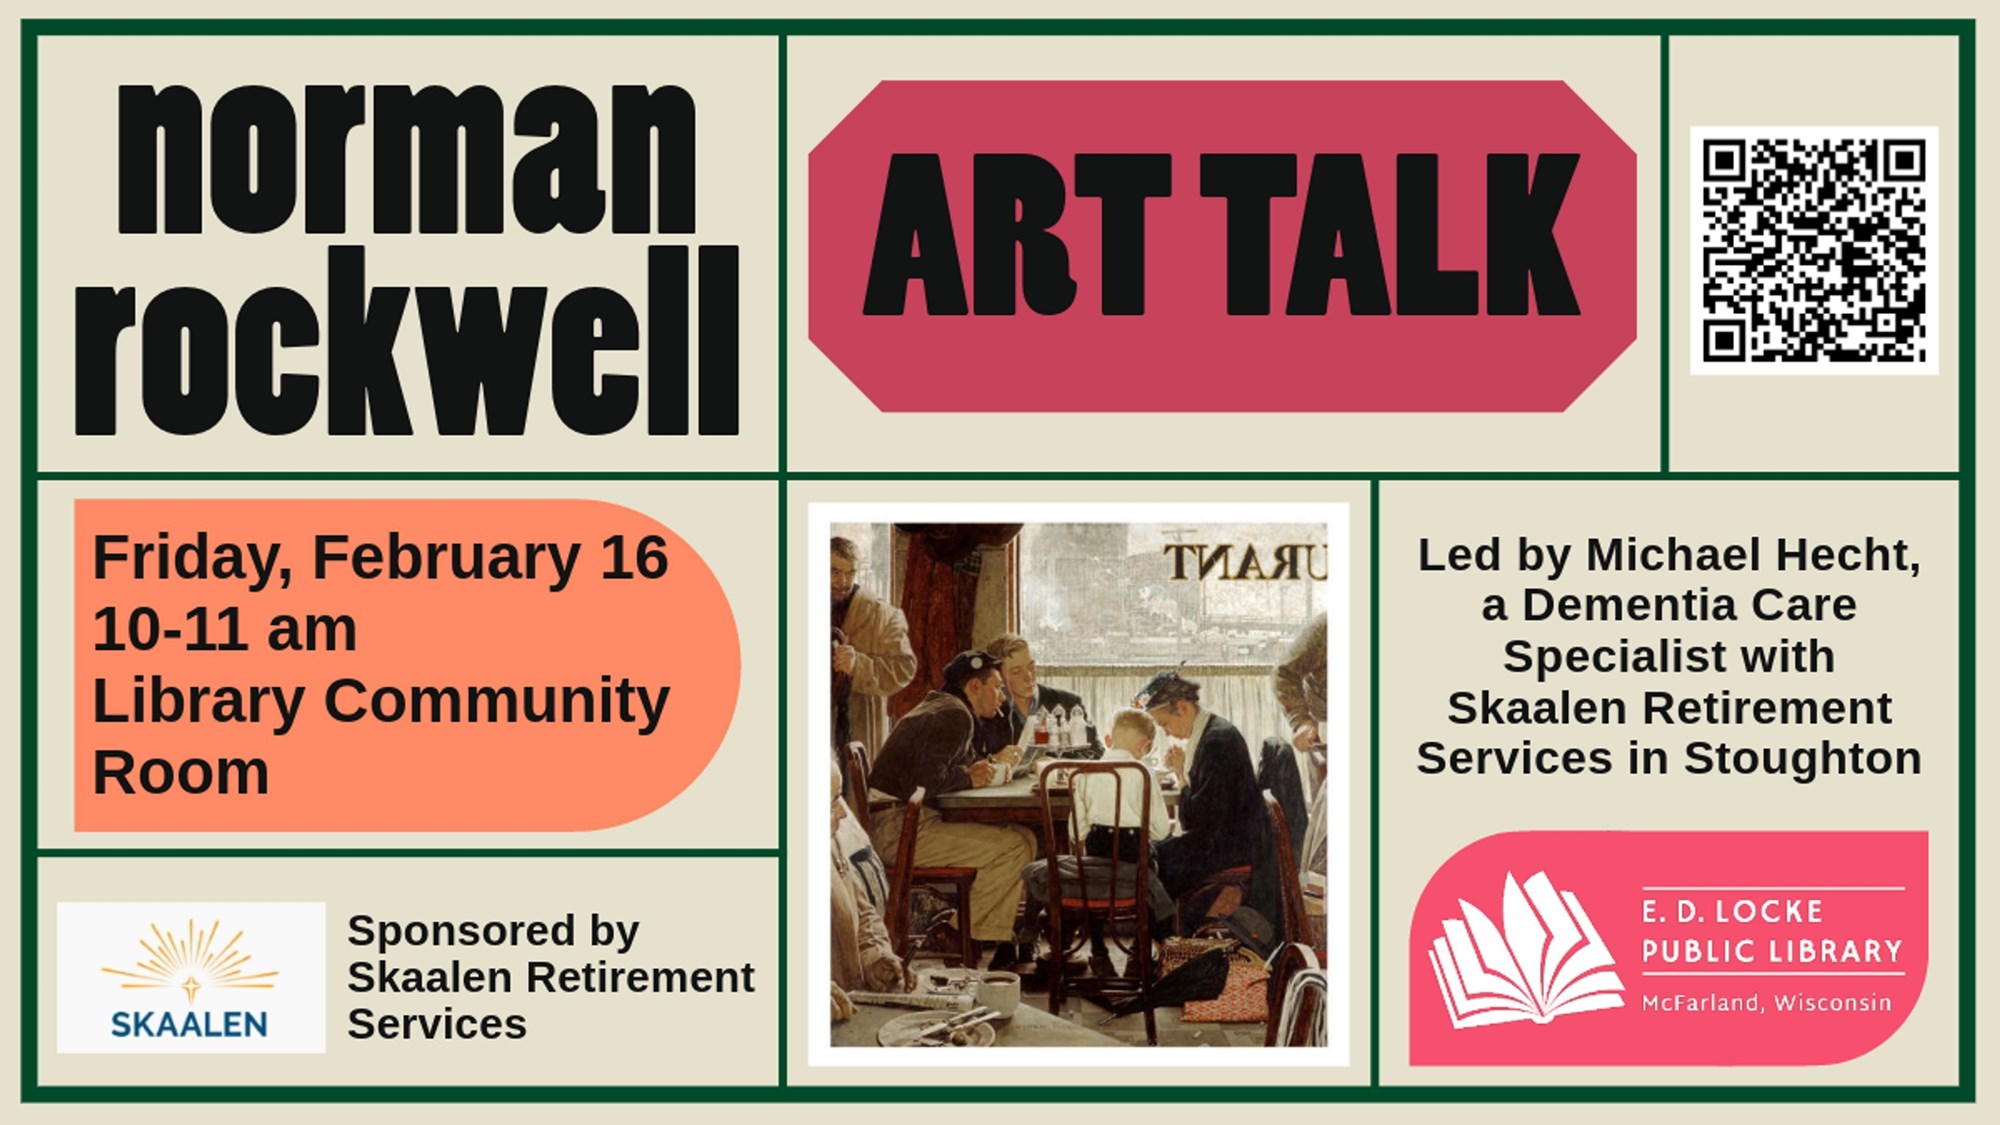 Norman Rockwell Art Talk Friday, February 16 10-11 am Library Community Room. Led by Michael Hecht, a Dementia Care Specialist with Skaalen Retirement Services in Stoughton. Sponsored by Skaalen Retirement Services